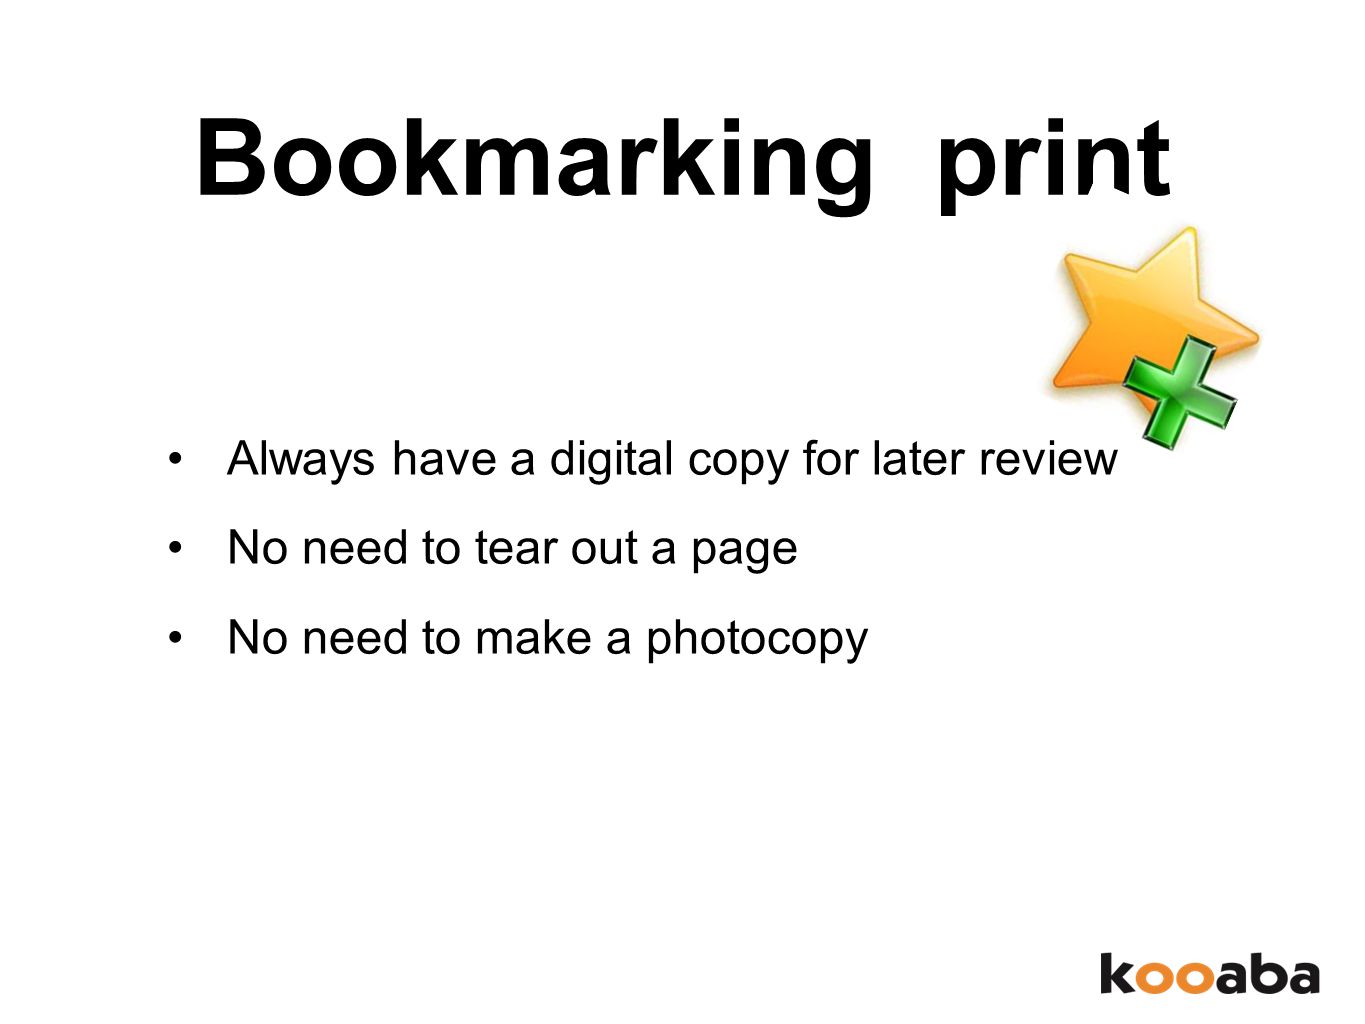 Bookmarking print Always have a digital copy for later review No need to tear out a page No need to make a photocopy